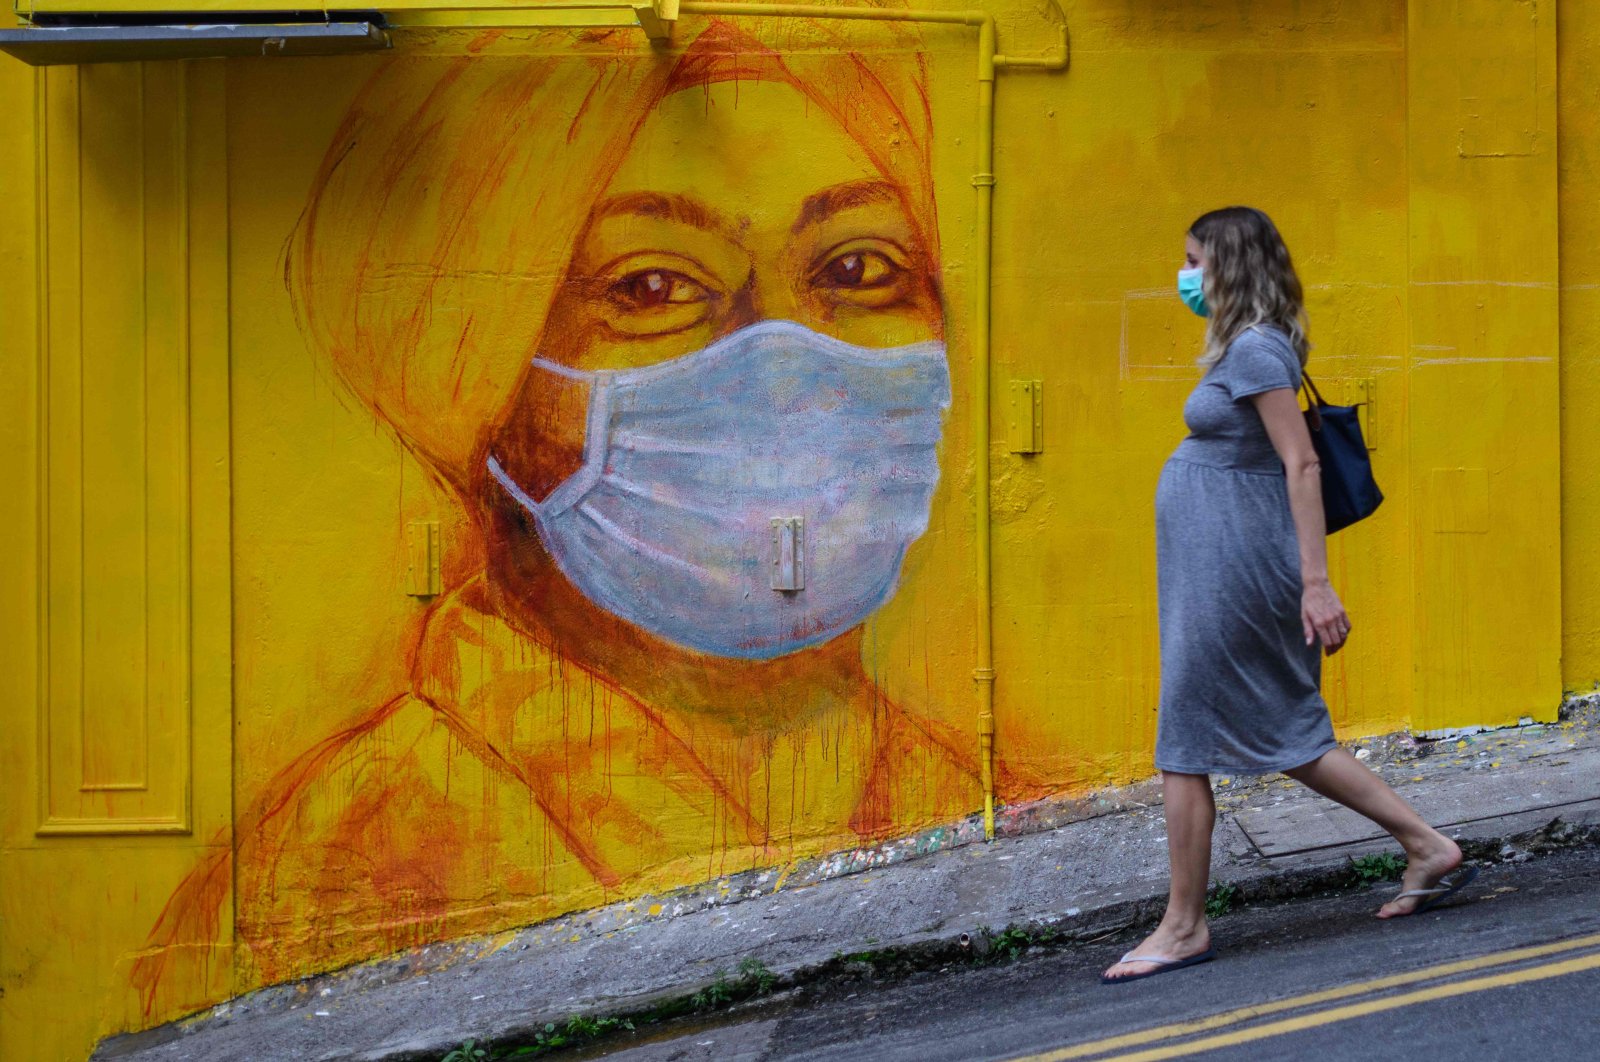 A pregnant woman wearing a face mask walks past a street mural in Hong Kong, March 23, 2020.